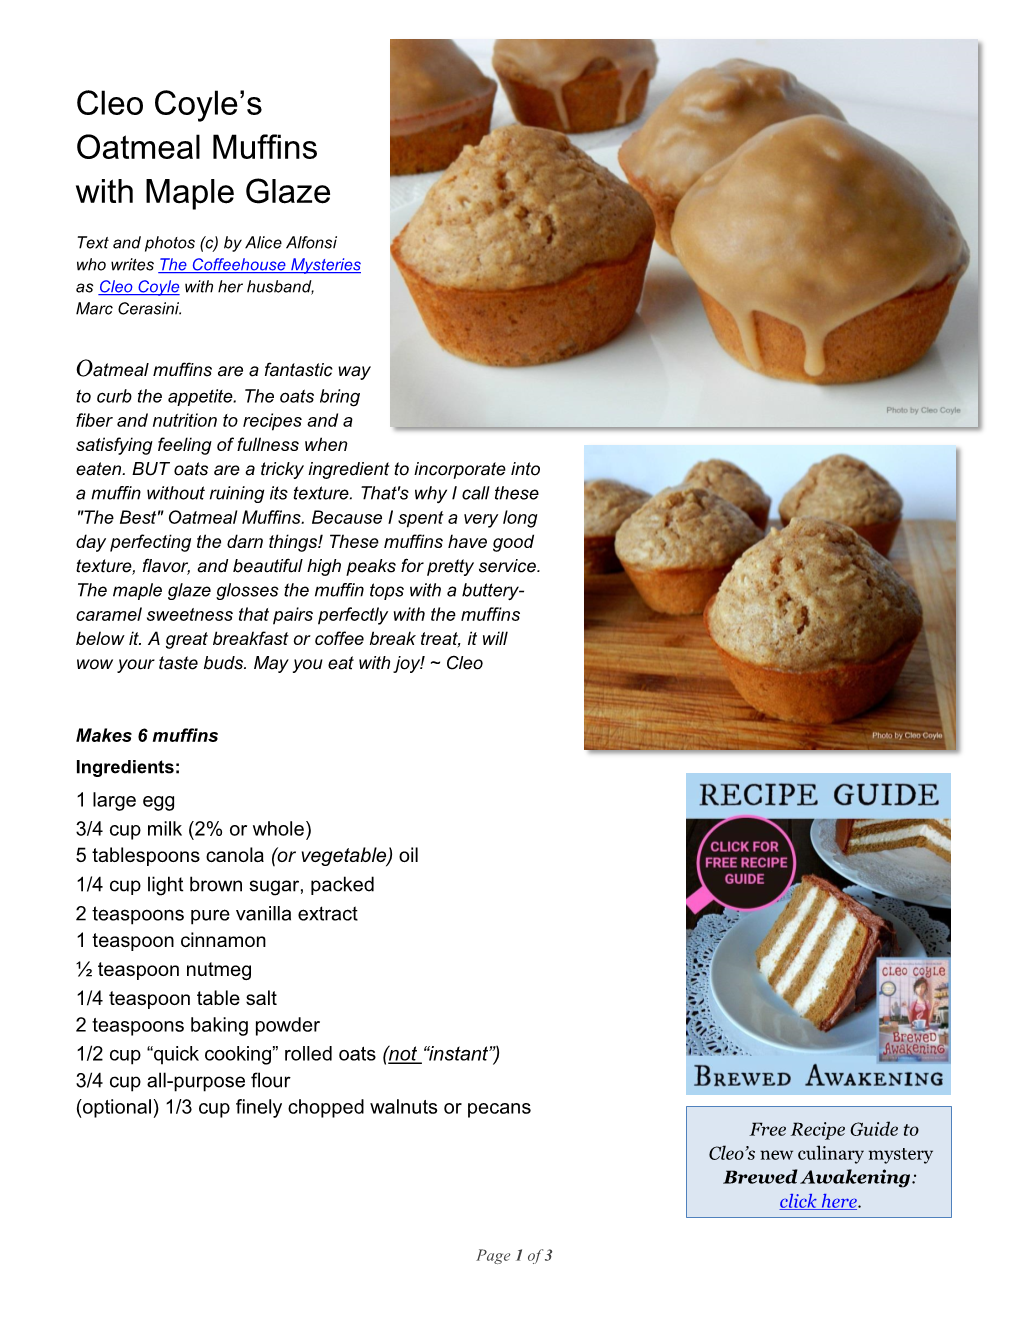 Maple-Glazed Oatmeal Muffins by Cleo Coyle